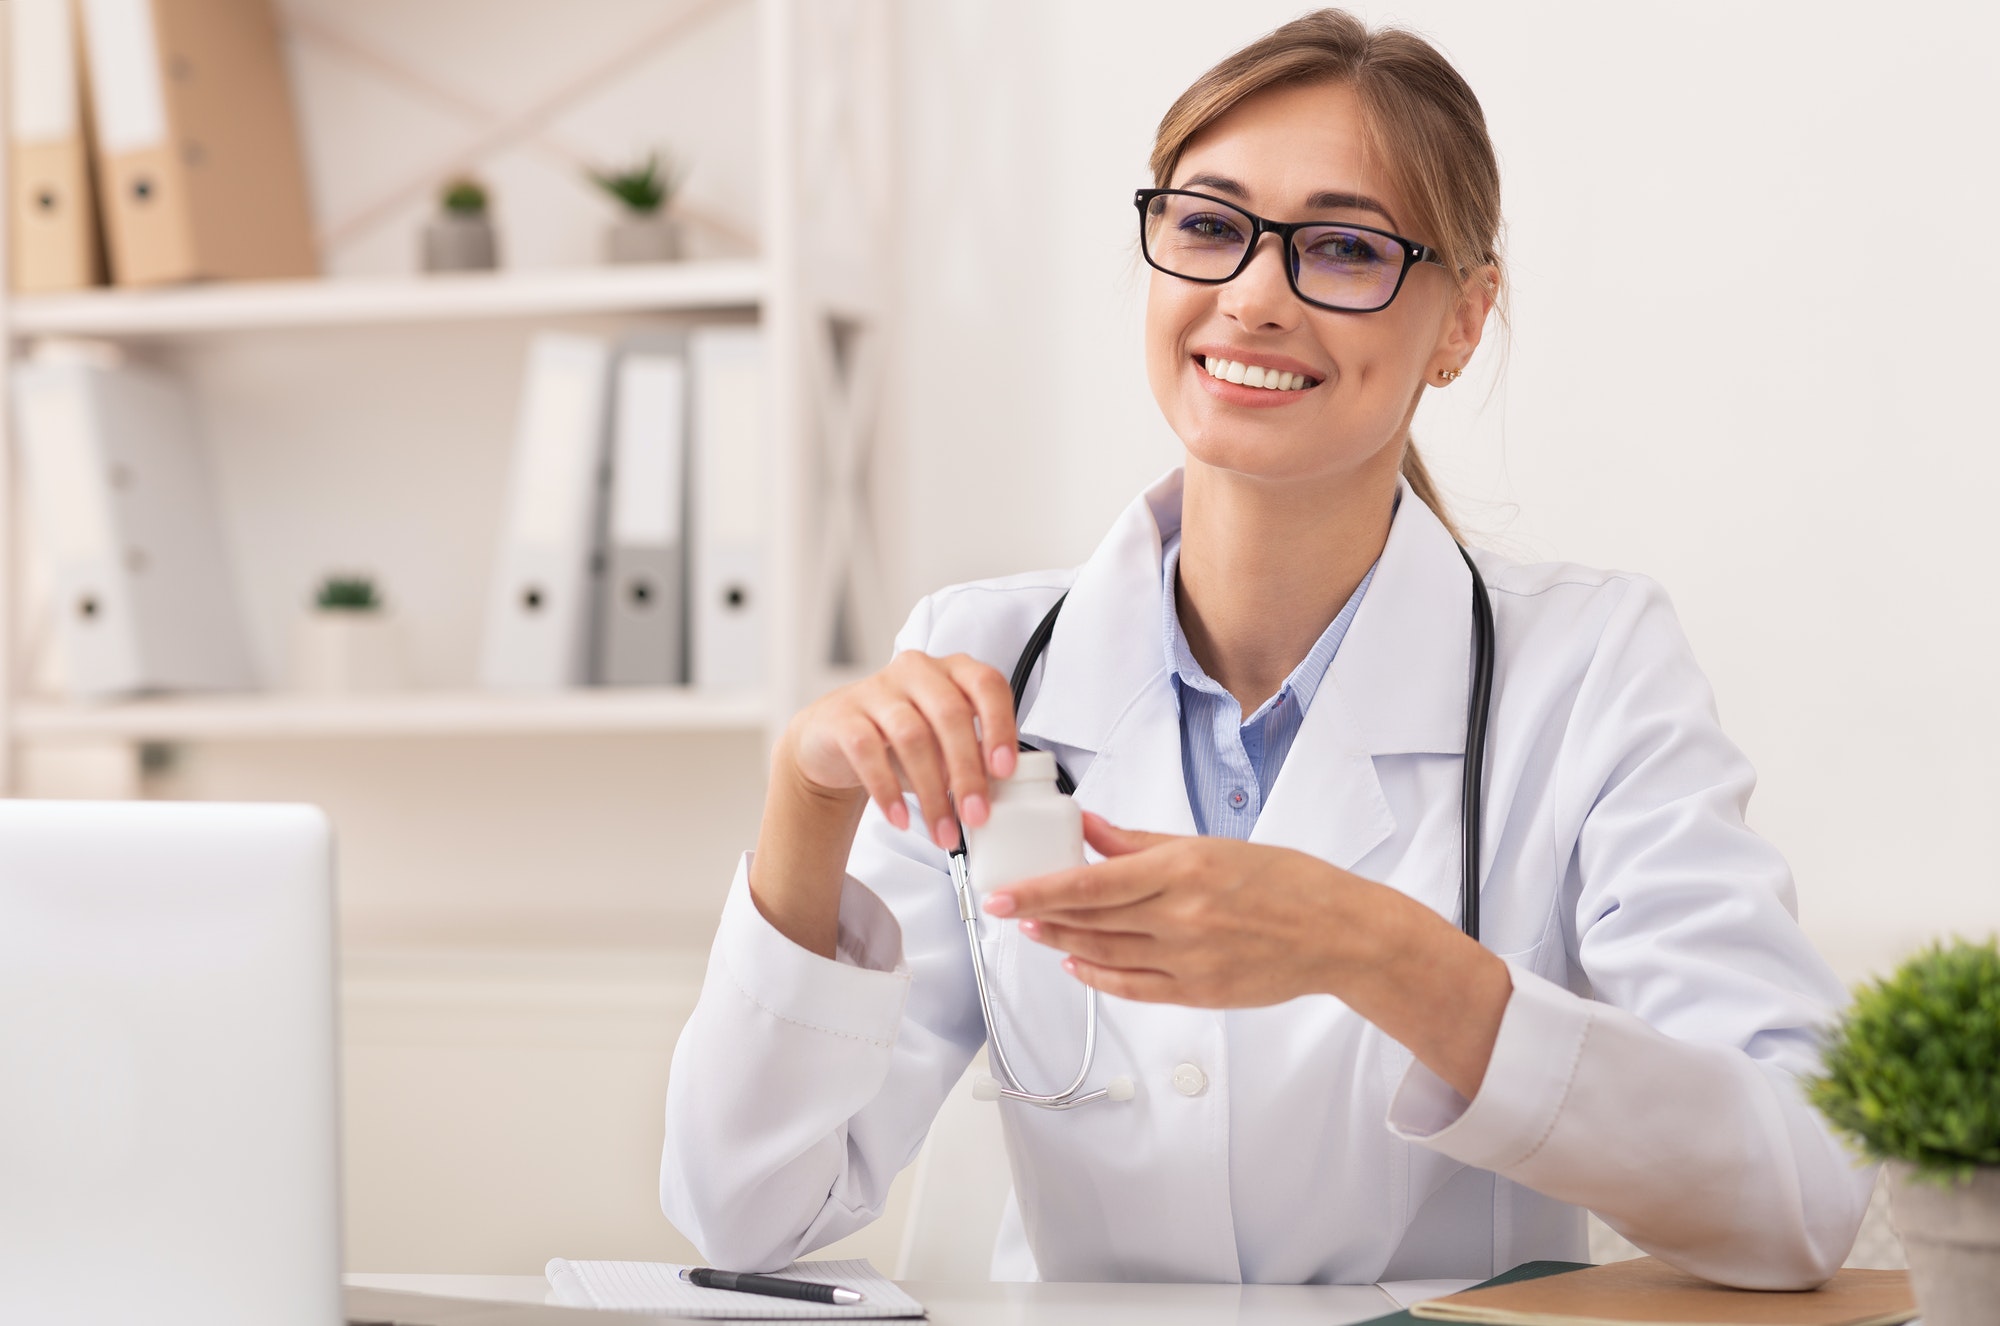 Smiling Doctor Woman Holding Prescribed Medication Jar Sitting In Office